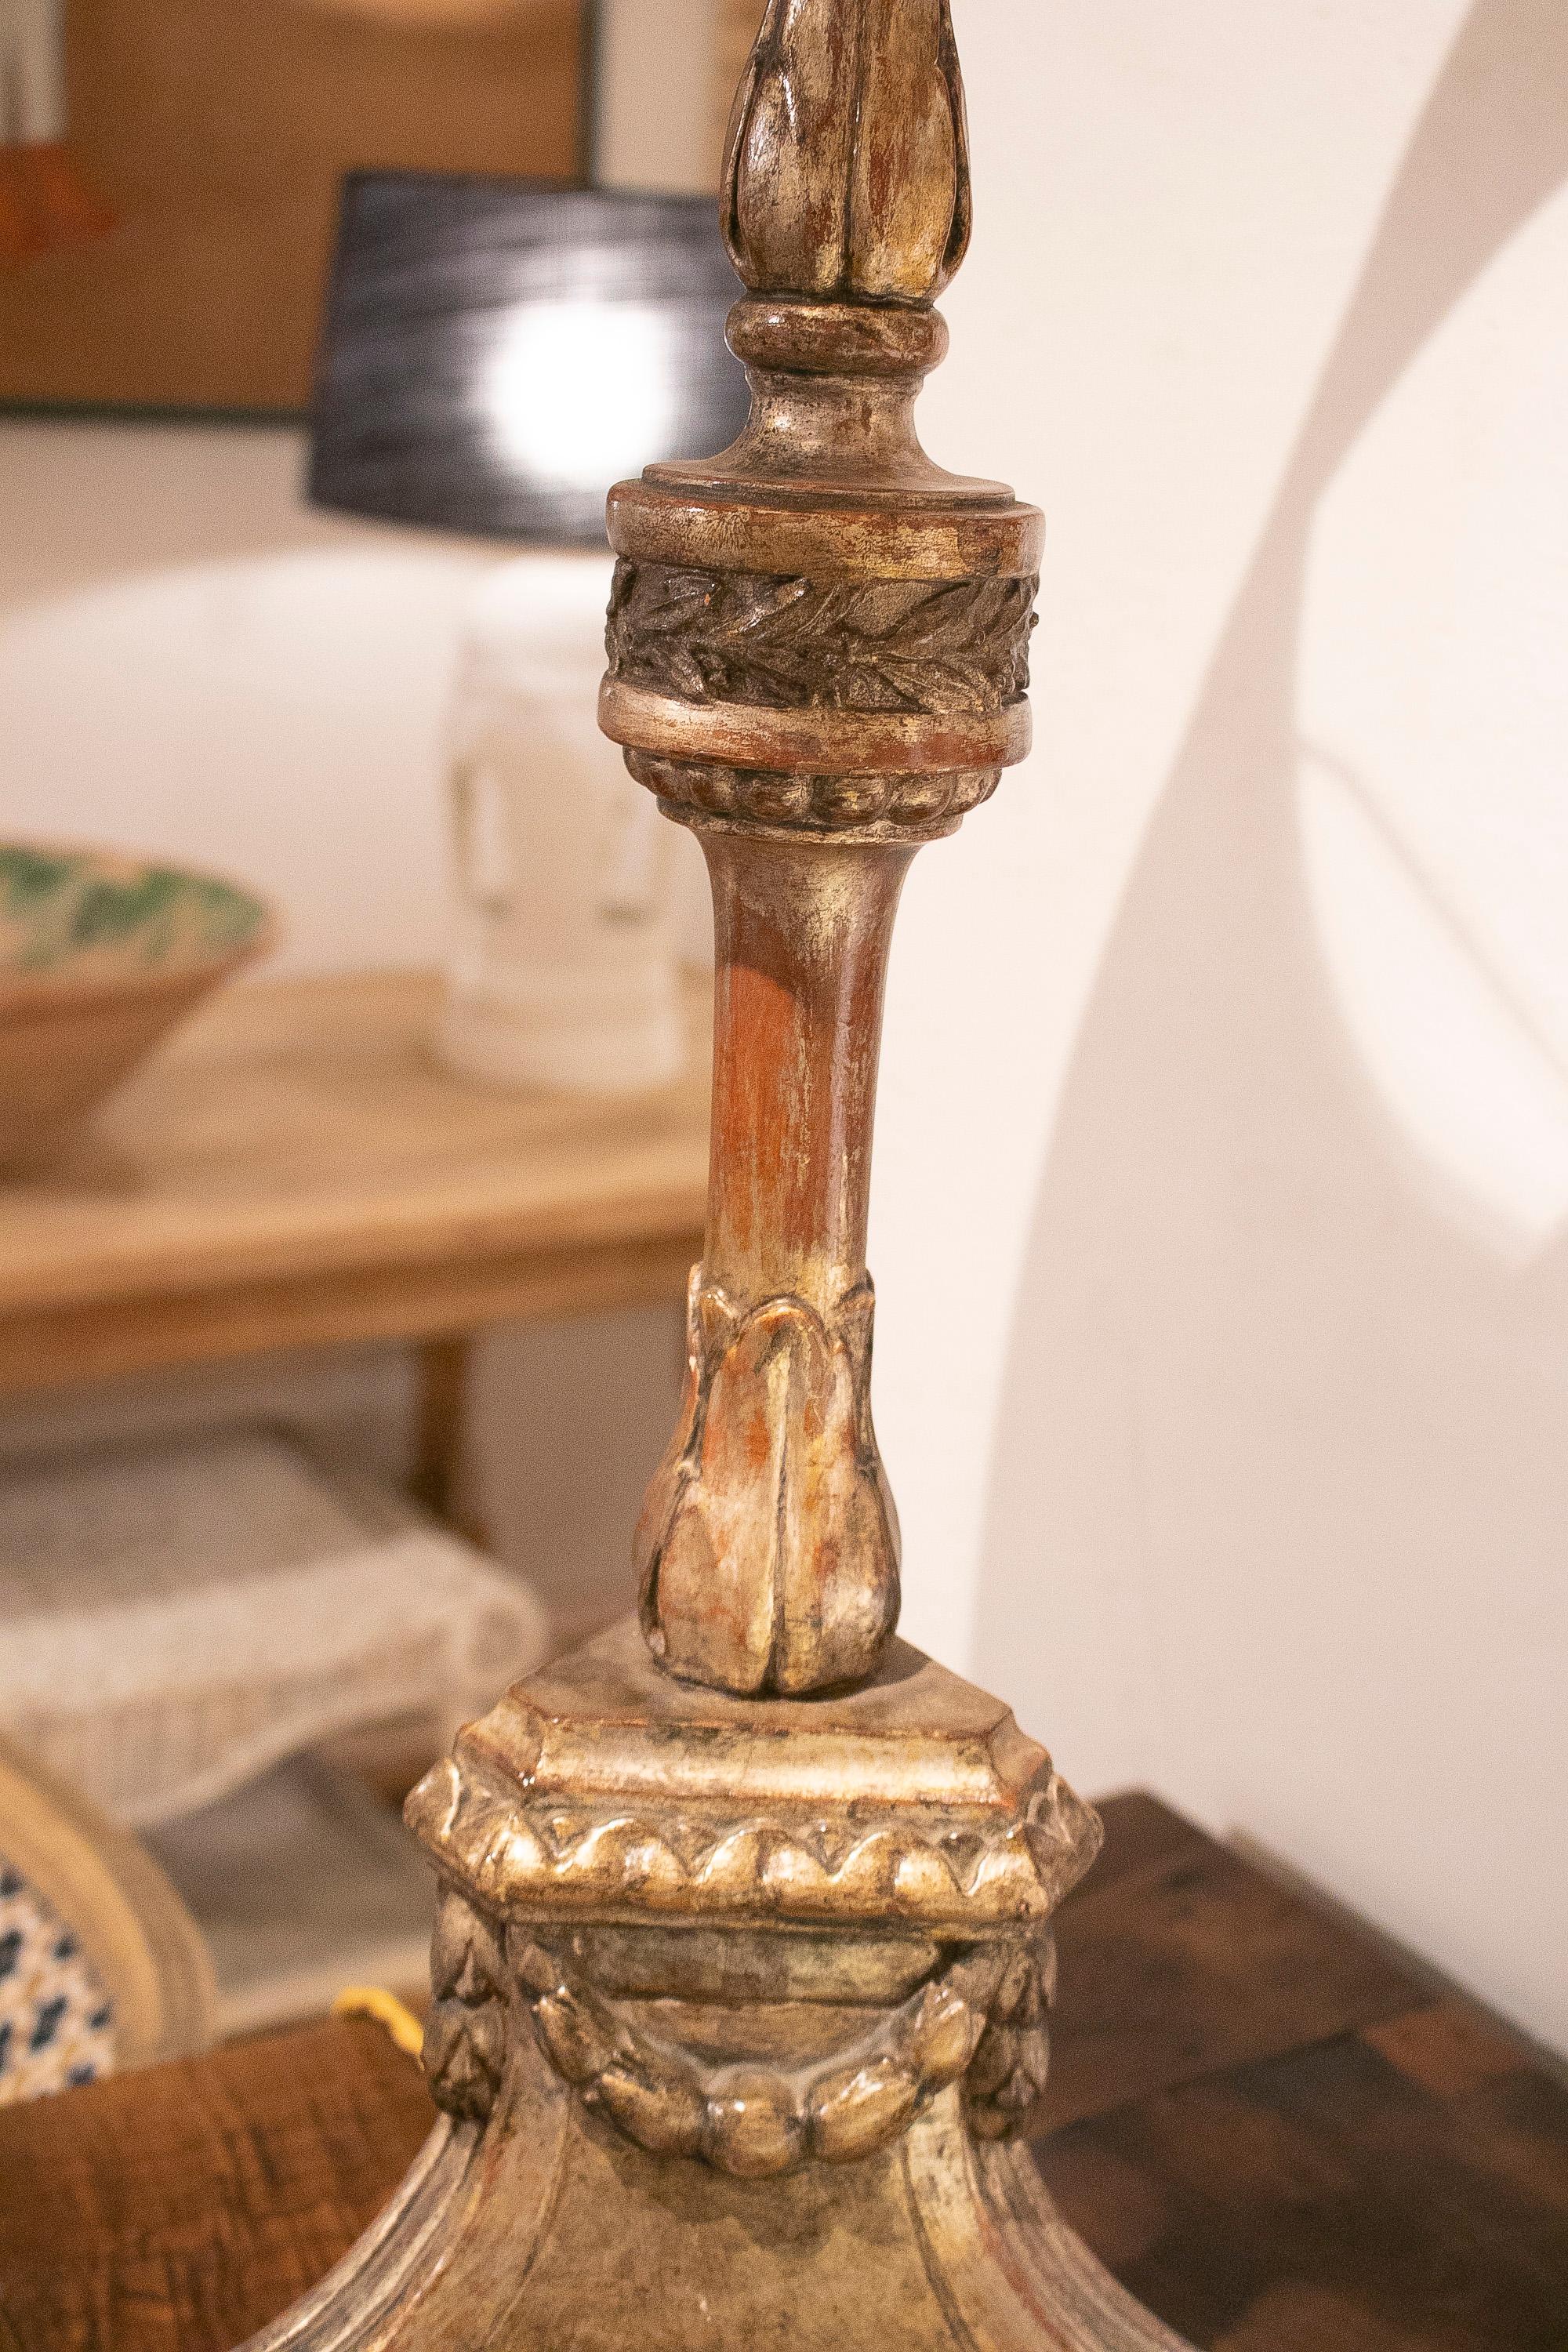 19th Century Spanish Giltwood Candlestick Turned Table Lamp For Sale 1